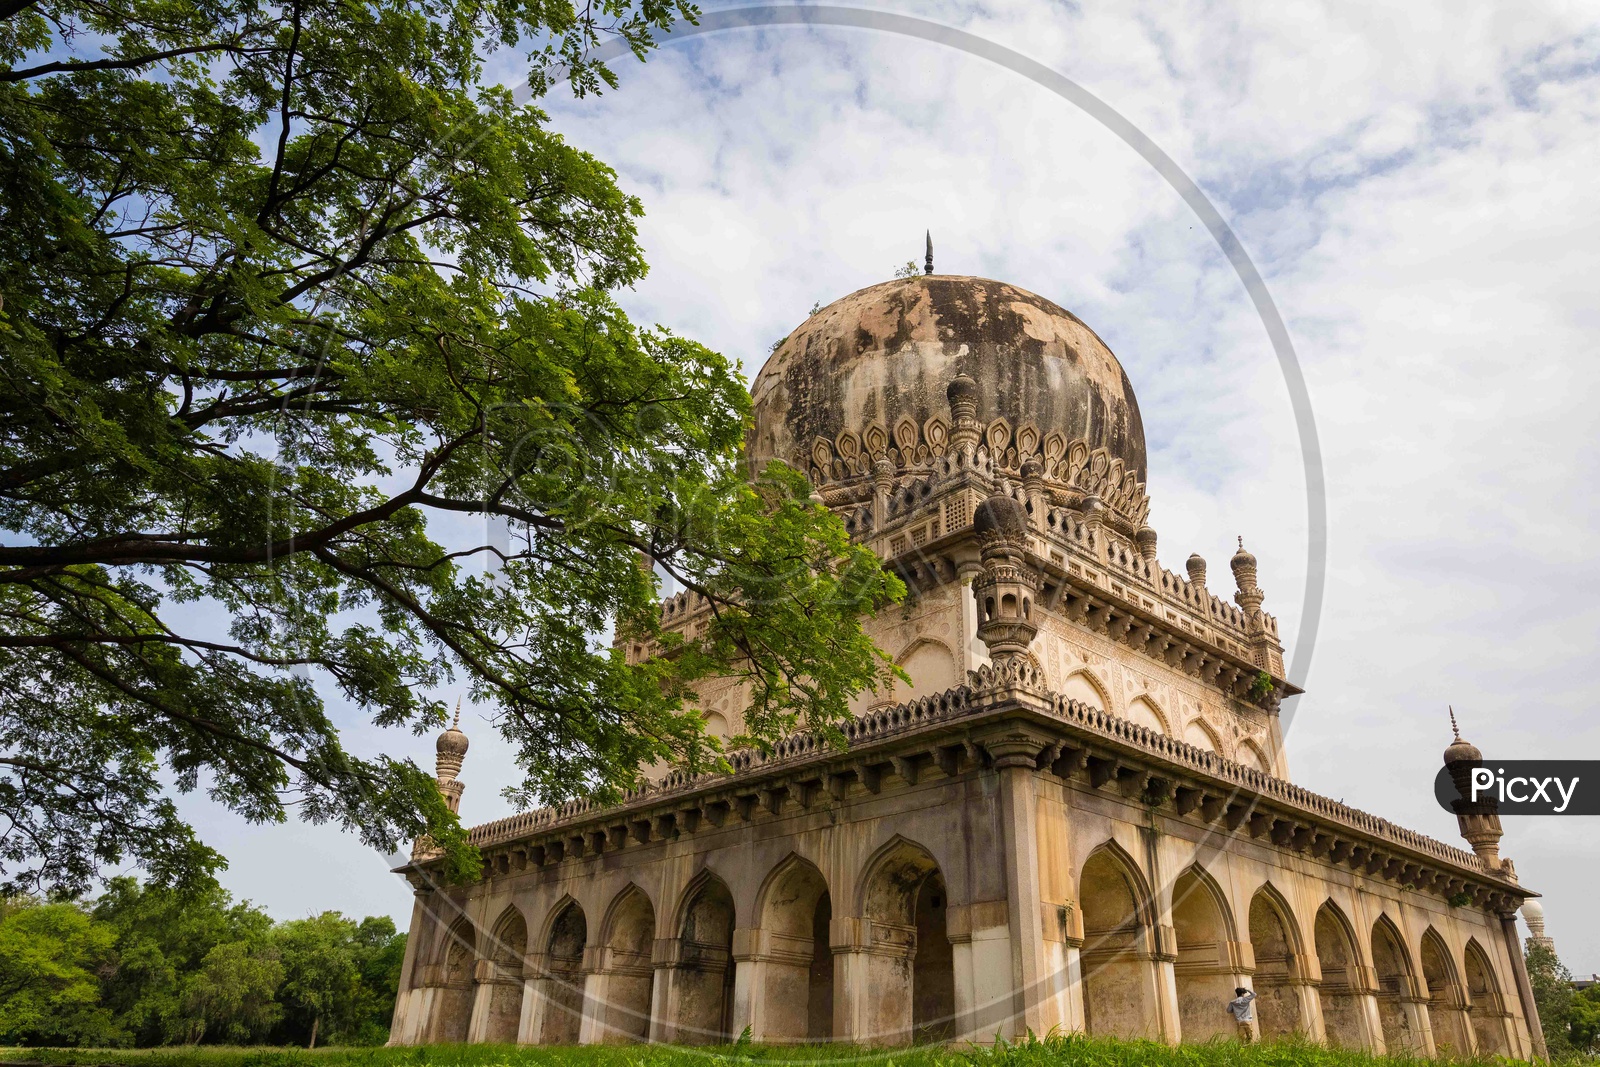 Architecture of Qutub Shahi Tombs